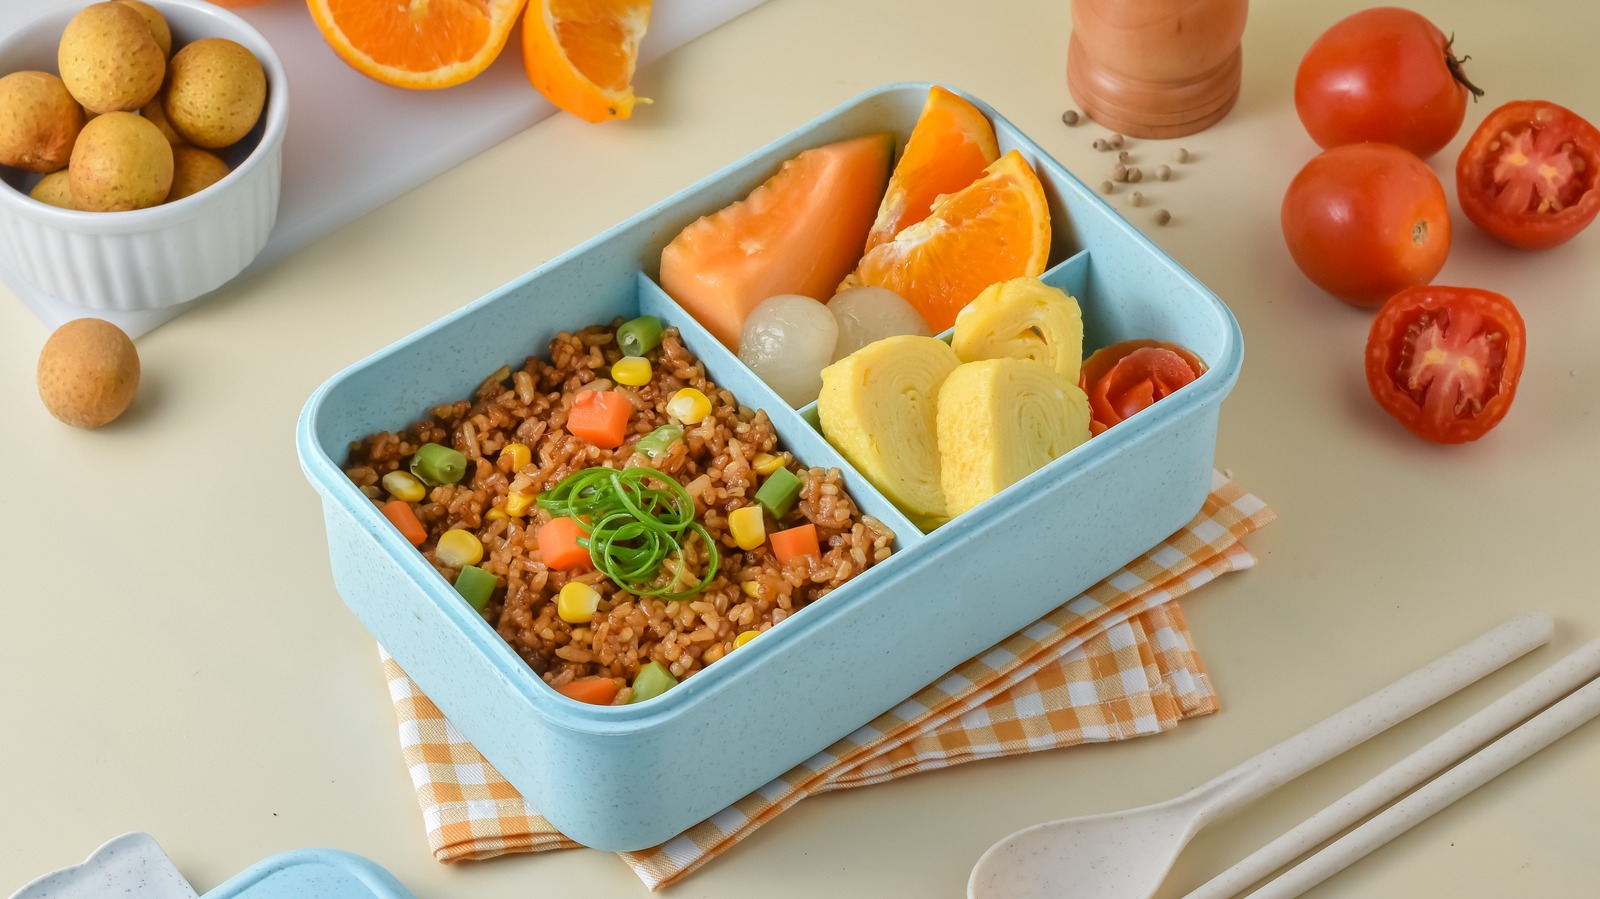 https://www.mashed.com/img/gallery/the-best-bento-boxes-to-buy-in-2022/l-intro-1663944013.jpg